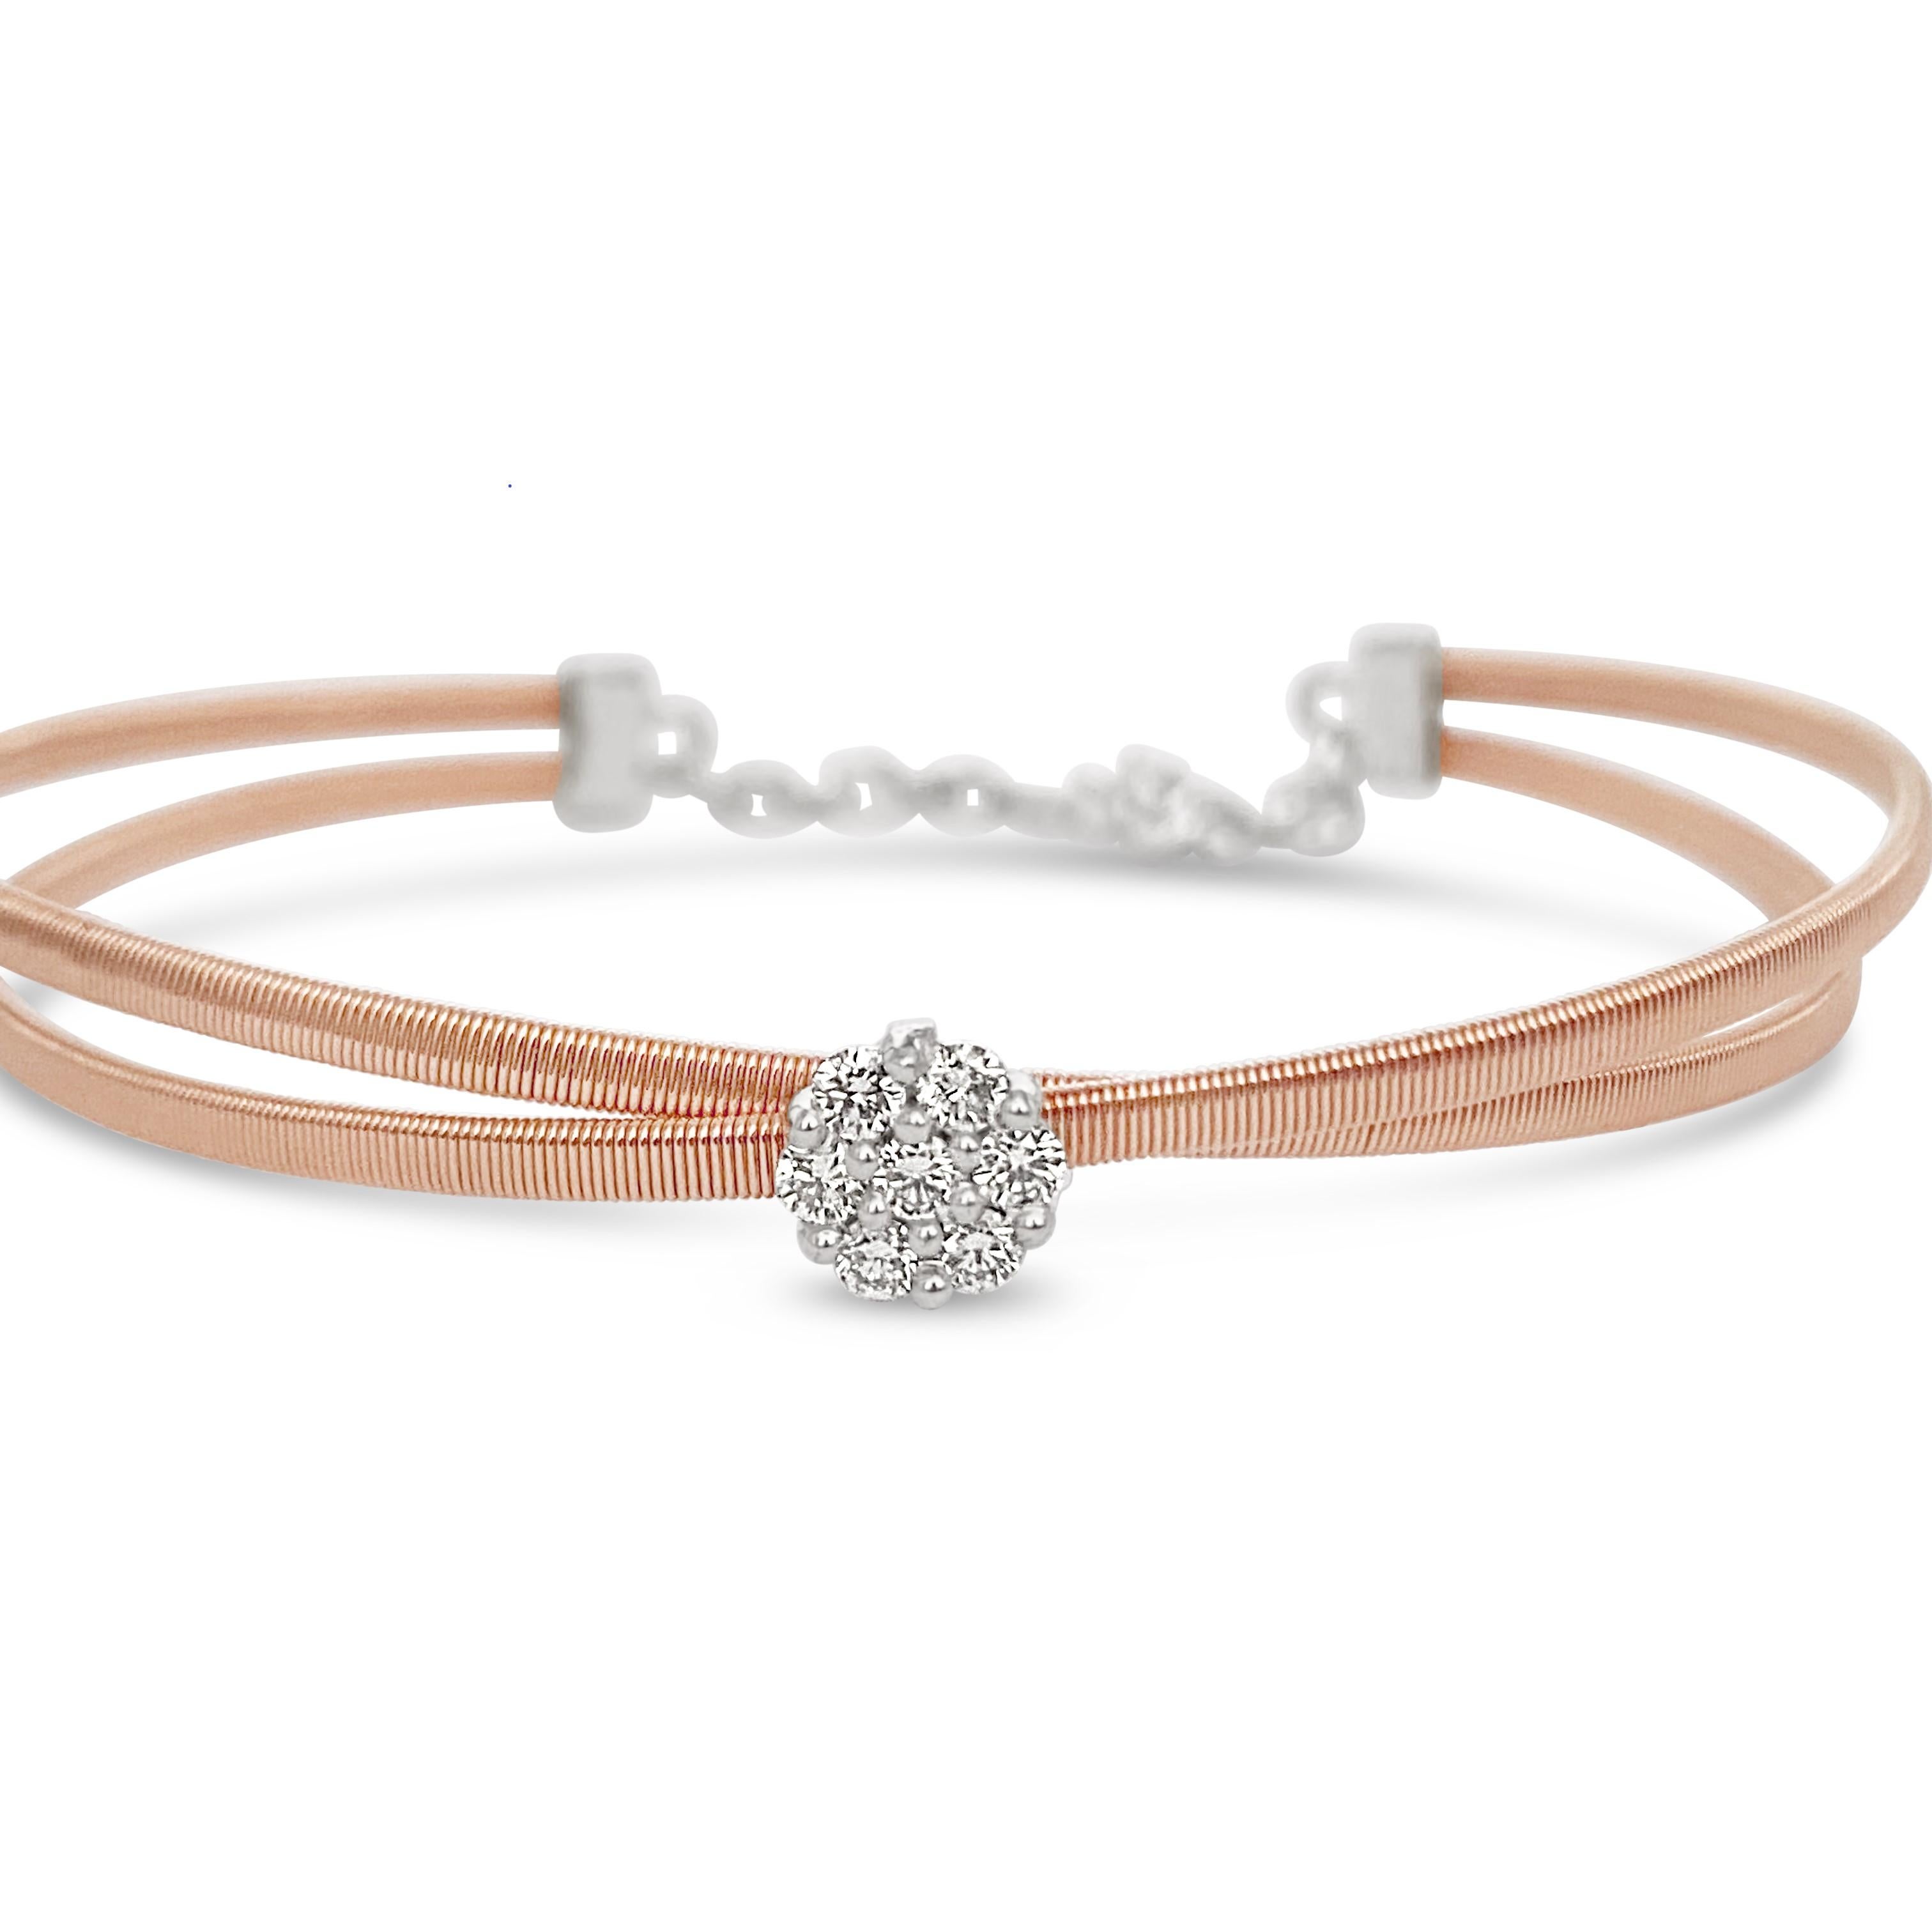 Introducing the Rose Bracelet, a delicate and enchanting accessory that adds a touch of elegance to your wrist. This bracelet features a total of 0.29 carats of glistening diamonds, meticulously set in a 14K white gold band. It's a timeless piece